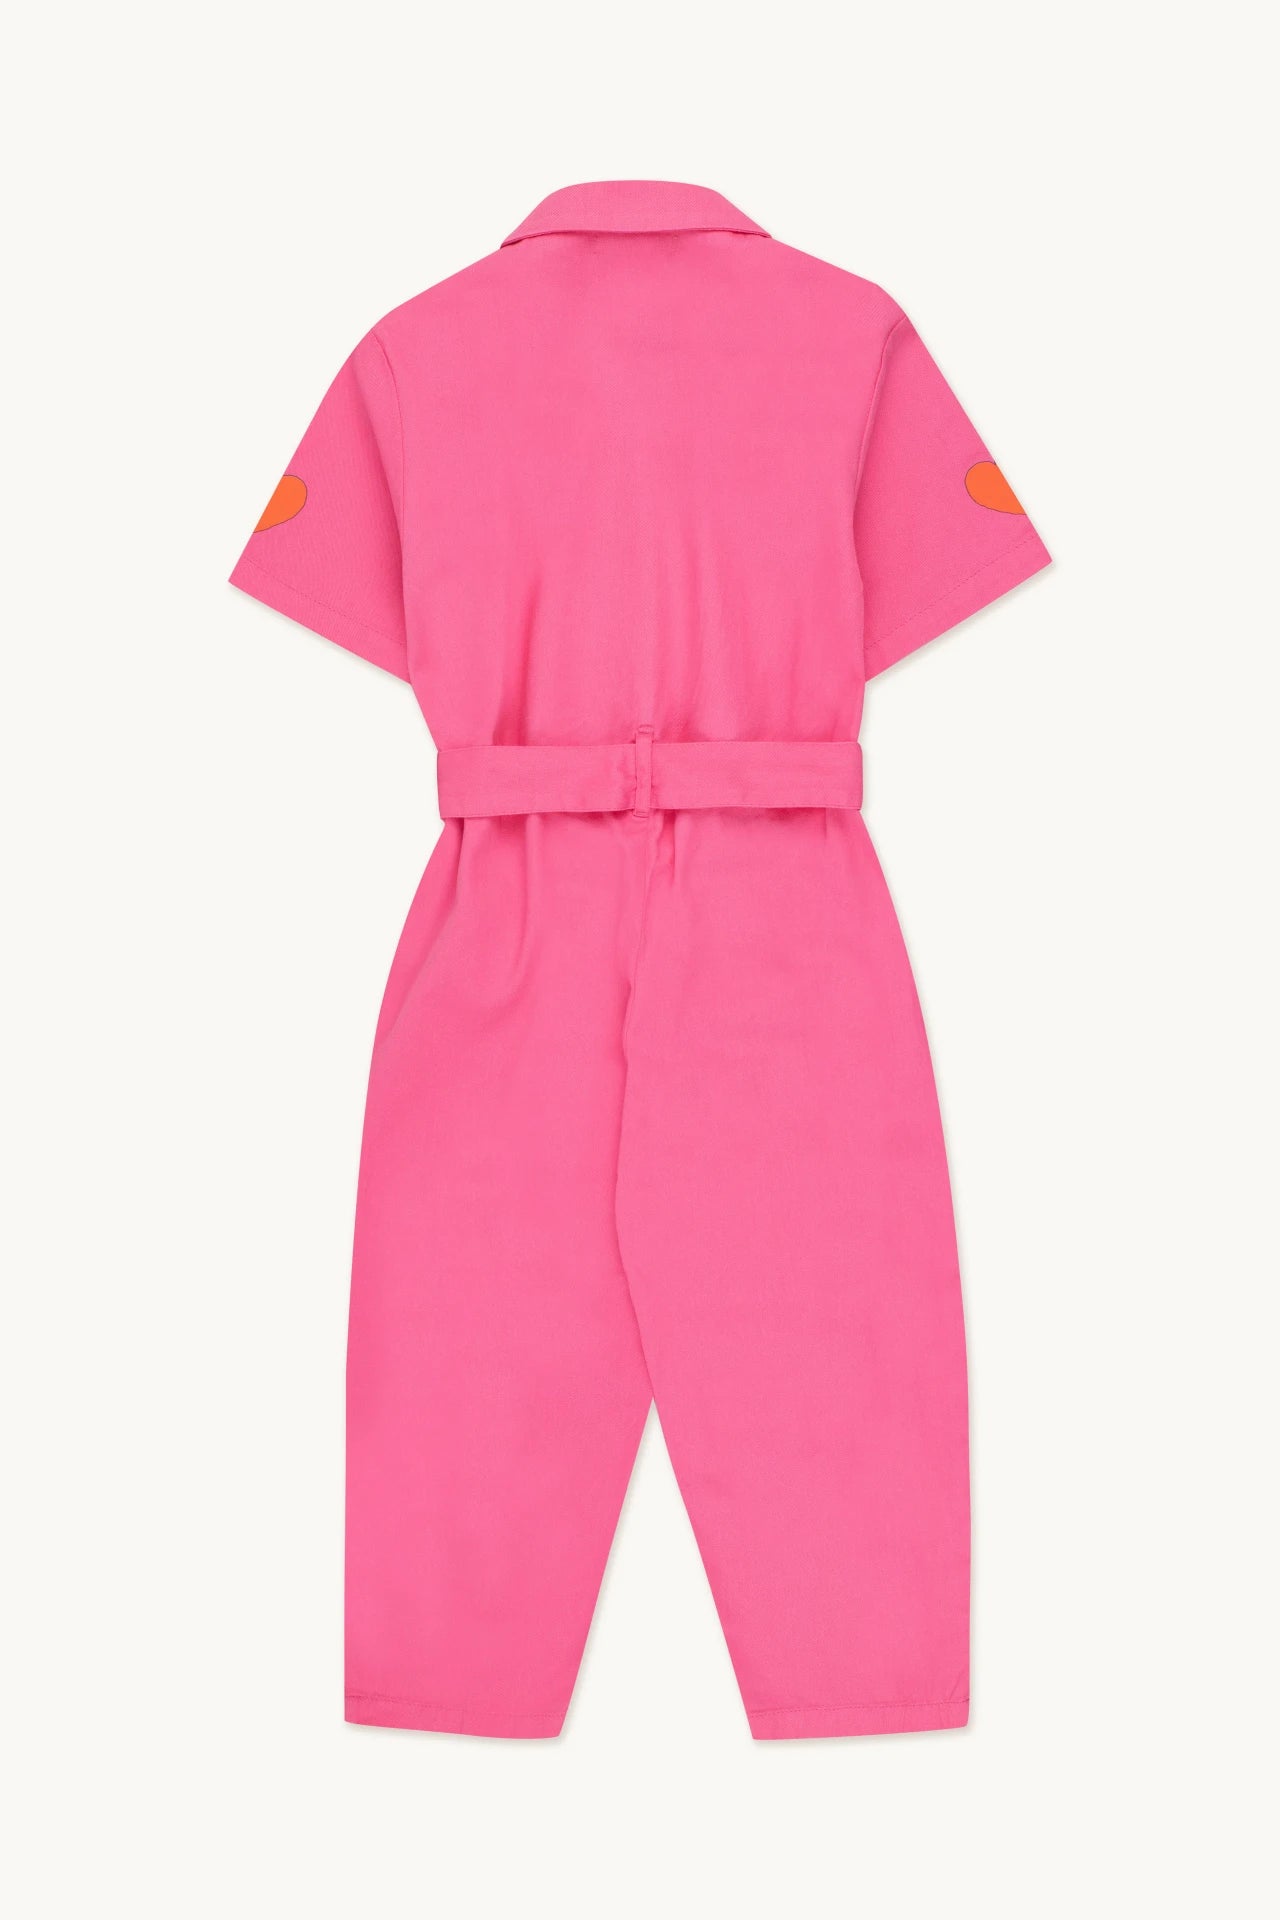 Tiny Cottons Hearts Jumpsuit in Dark Pink